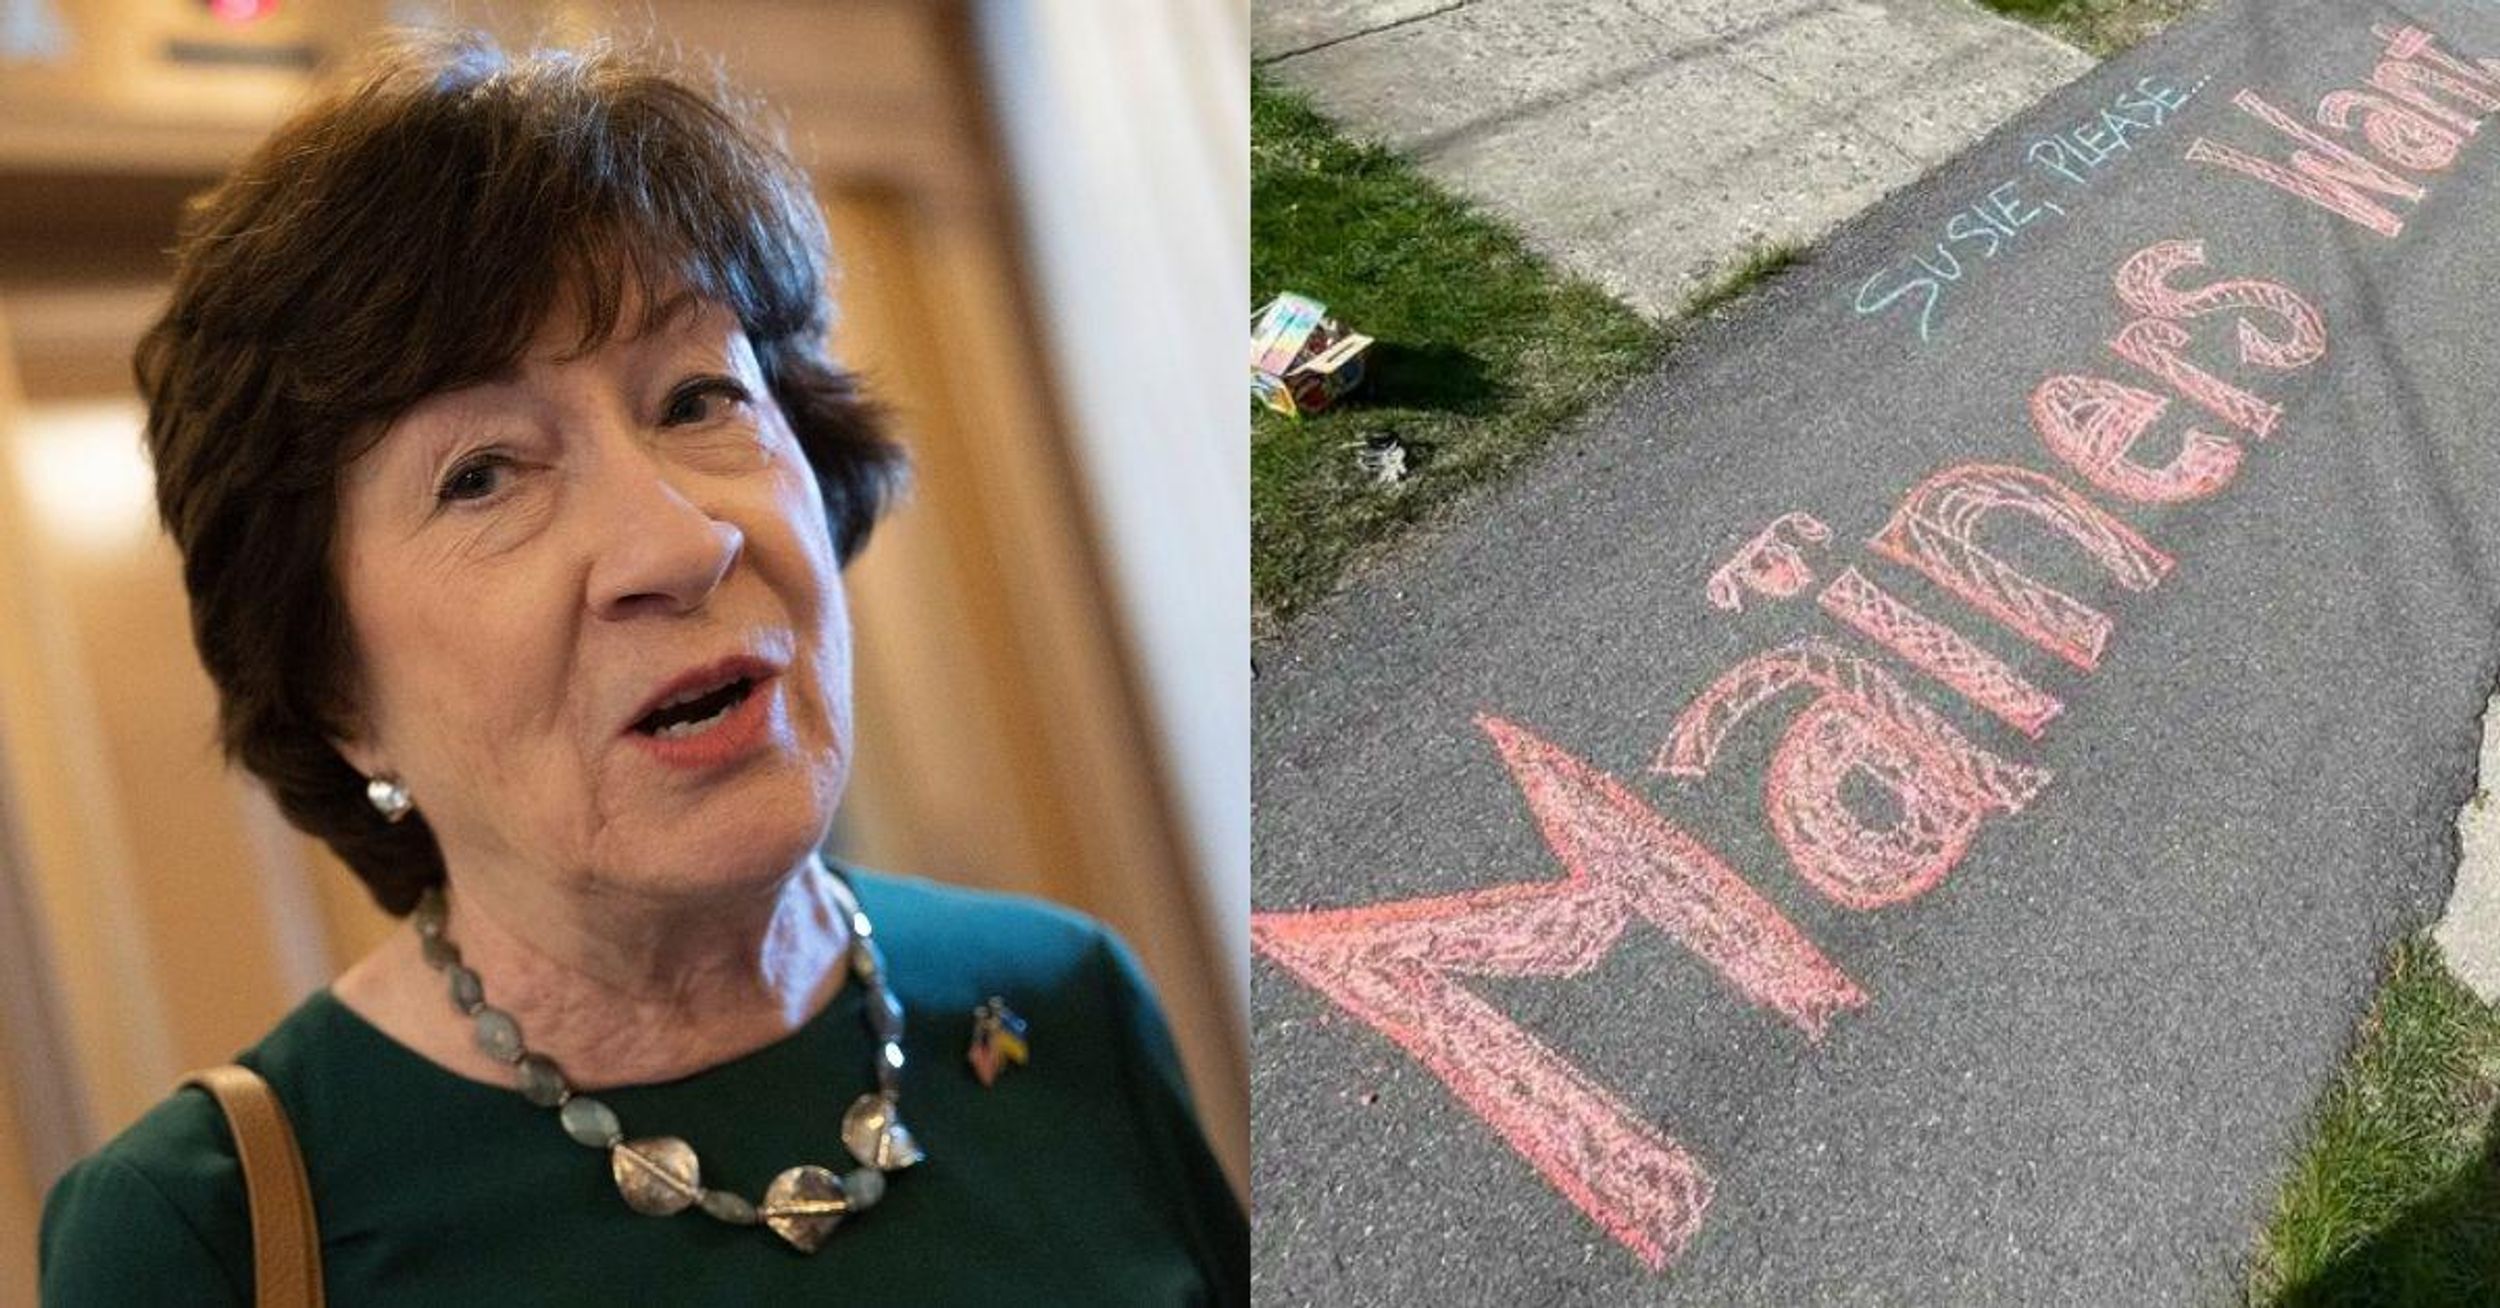 Sen. Collins Calls Cops After Finding Pro-Abortion Chalk Message On Sidewalk Outside Her Home